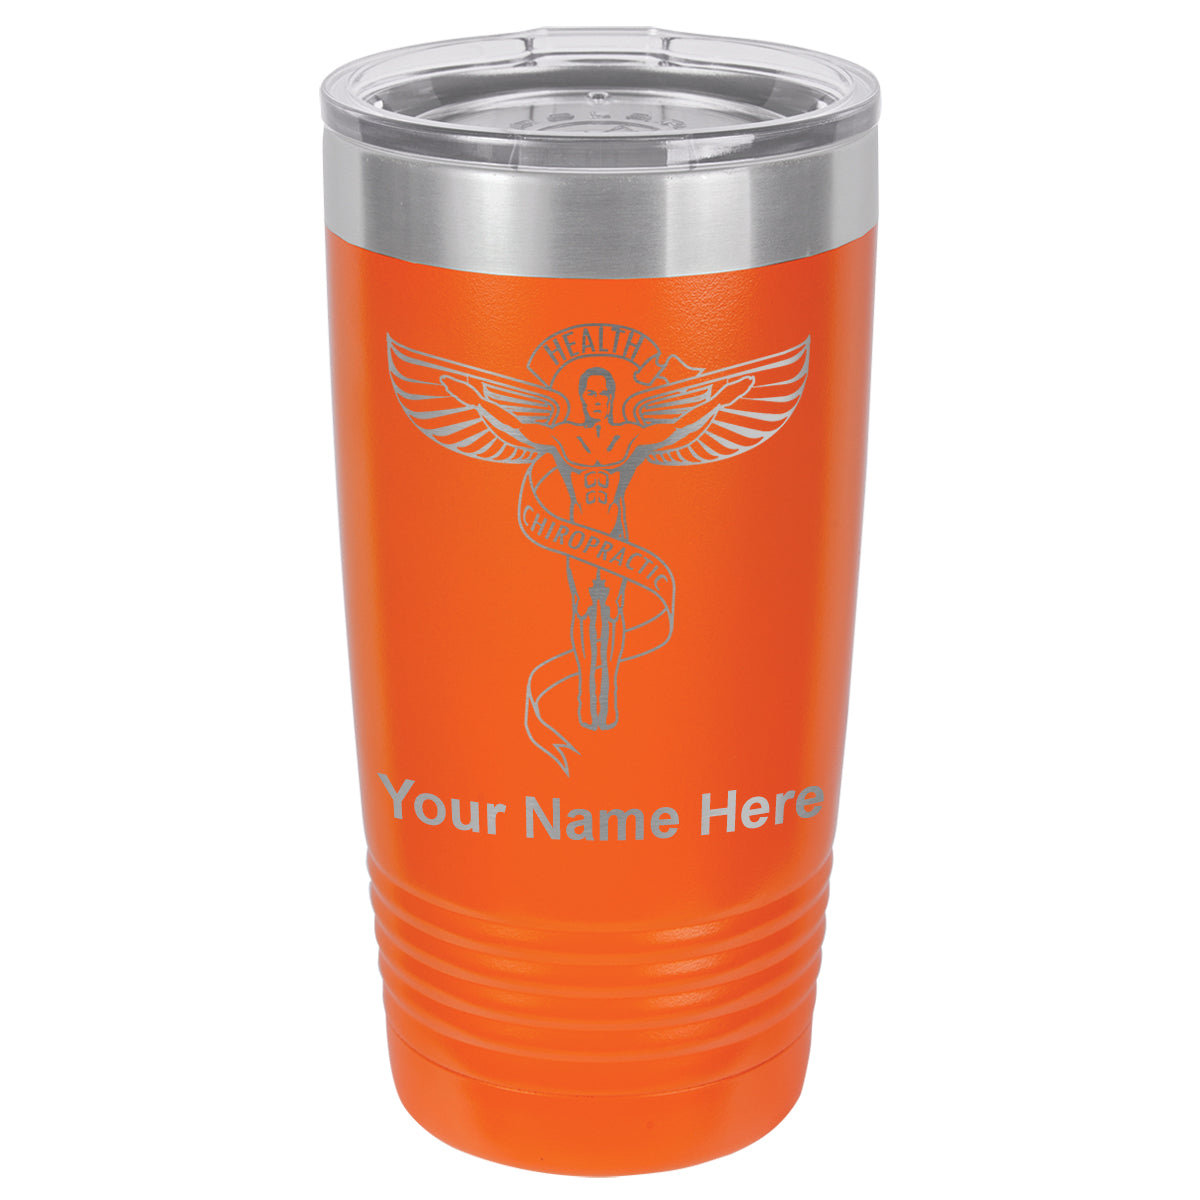 20oz Vacuum Insulated Tumbler Mug, Chiropractic Symbol, Personalized Engraving Included